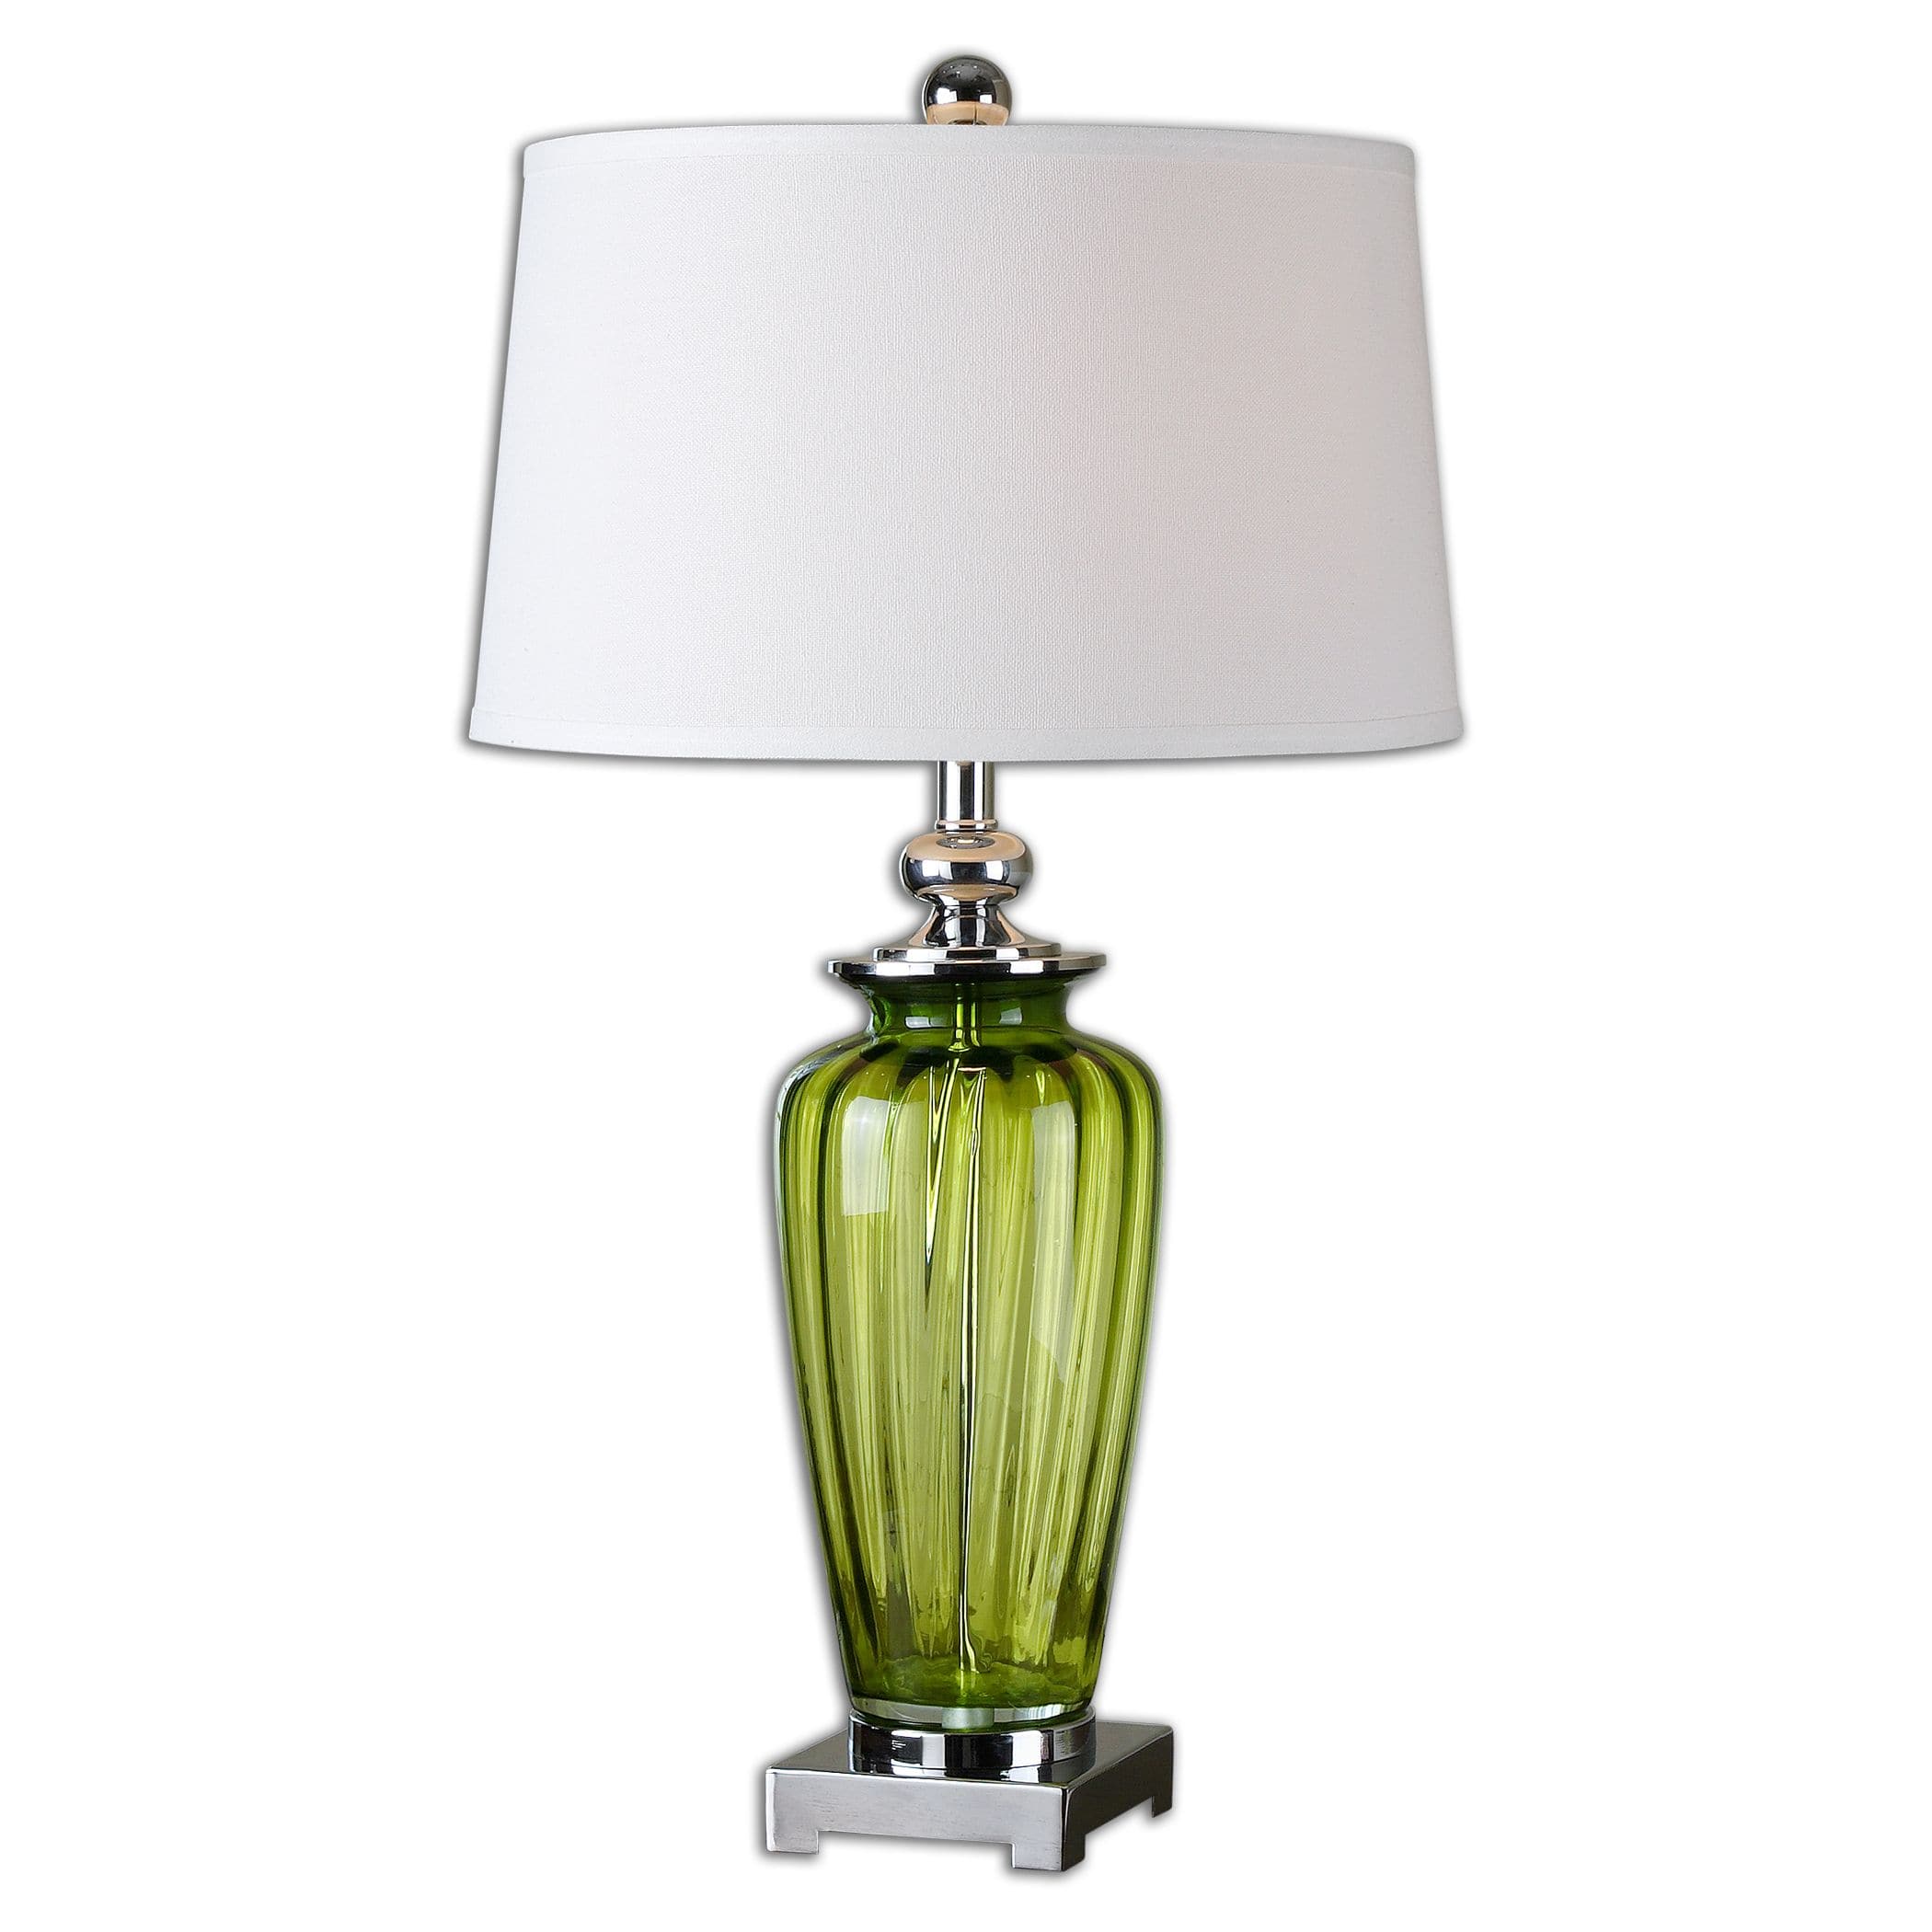 Uttermost 26593 Green Glass and Nickel Amedeo Table Lamp with